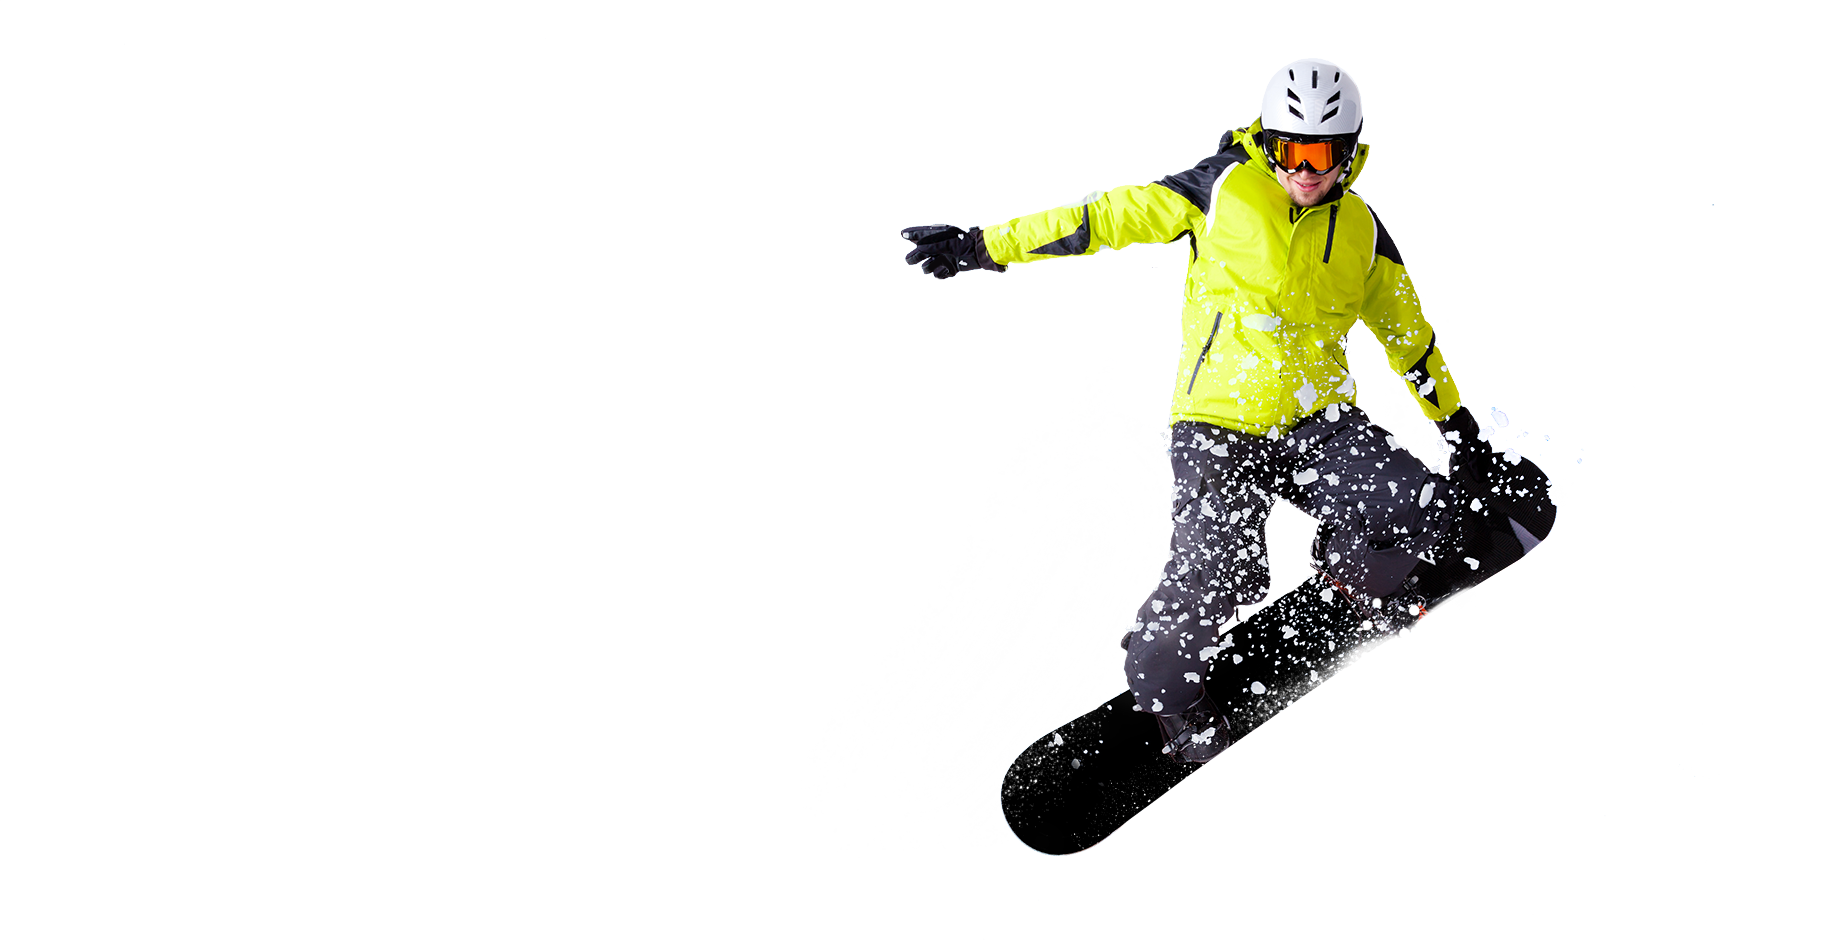 A Person In A Yellow Jacket And Helmet Jumping On A Ski